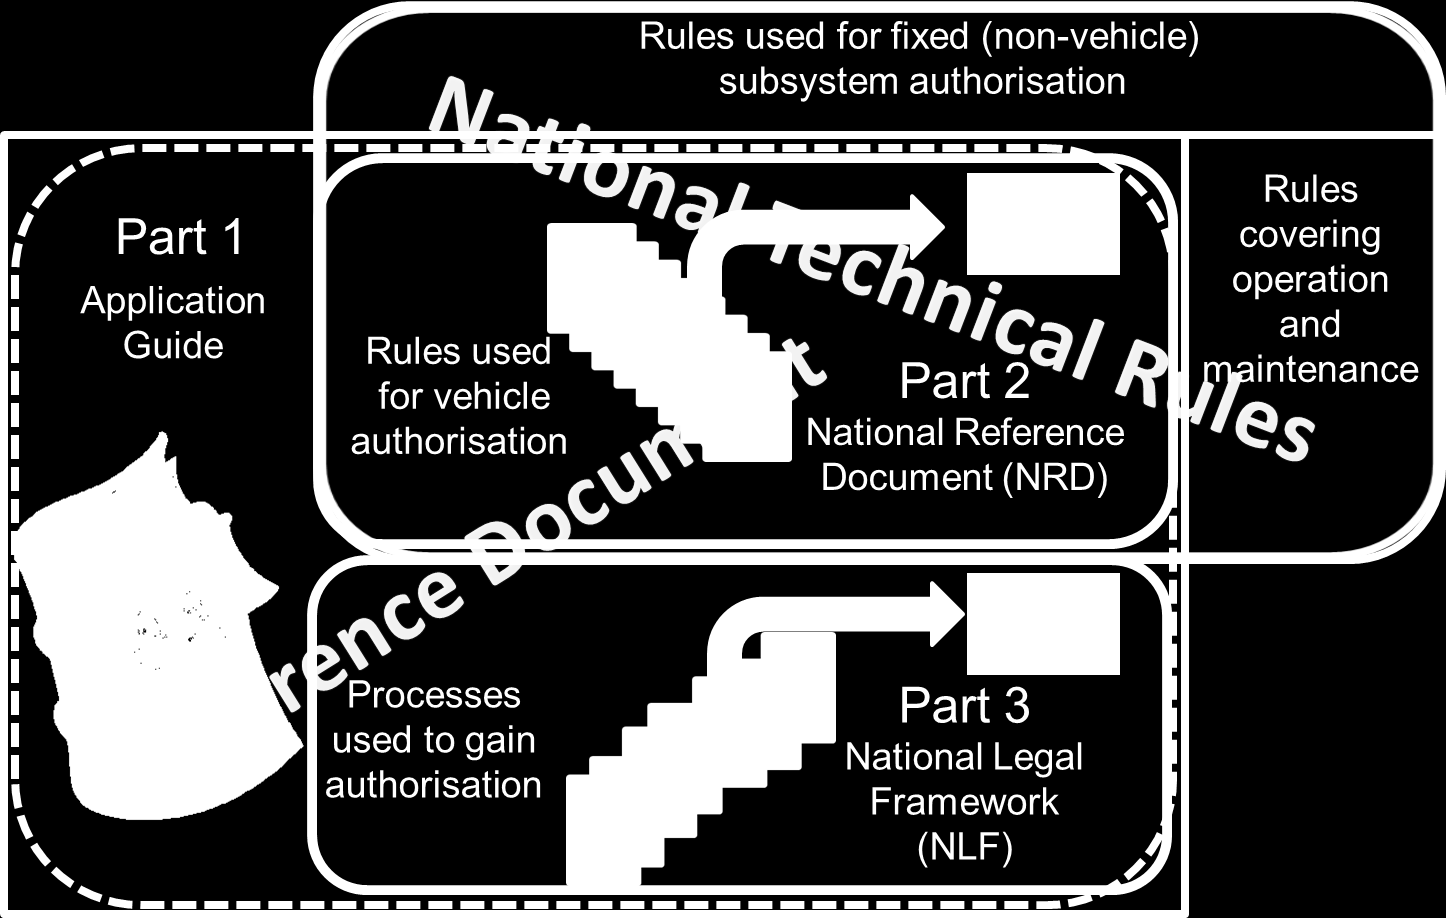 National Technical Rules Reference Document Rules used for fixed (non-vehicle) subsystem authorisation Rules covering operation and maintenance Rules used for vehicle authorisation Processes used to